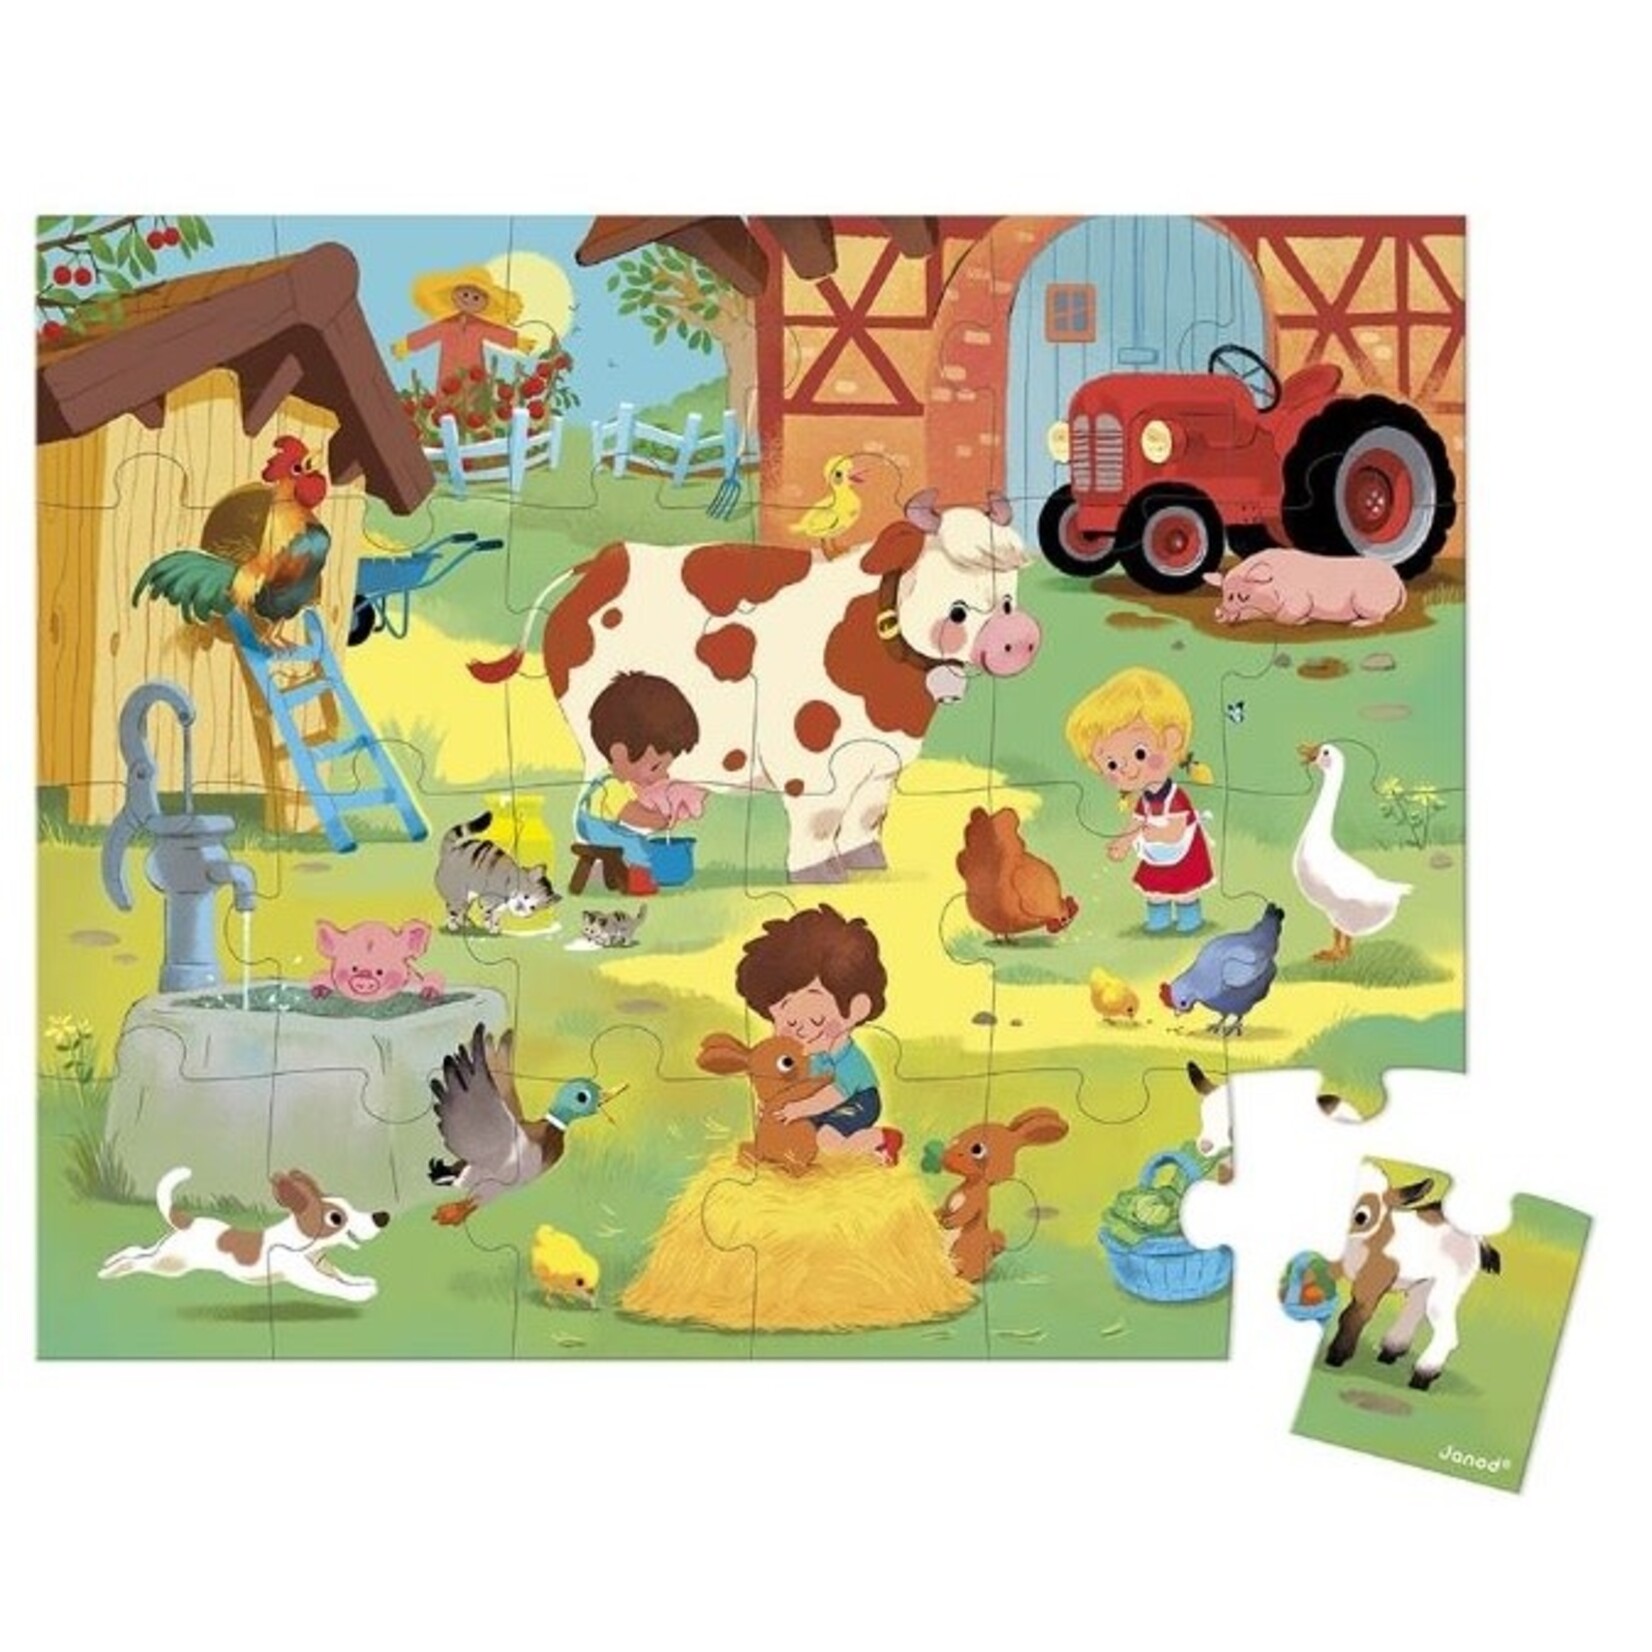 Janod JANOD - Observation puzzle with case - A day at the farm - 20 pieces